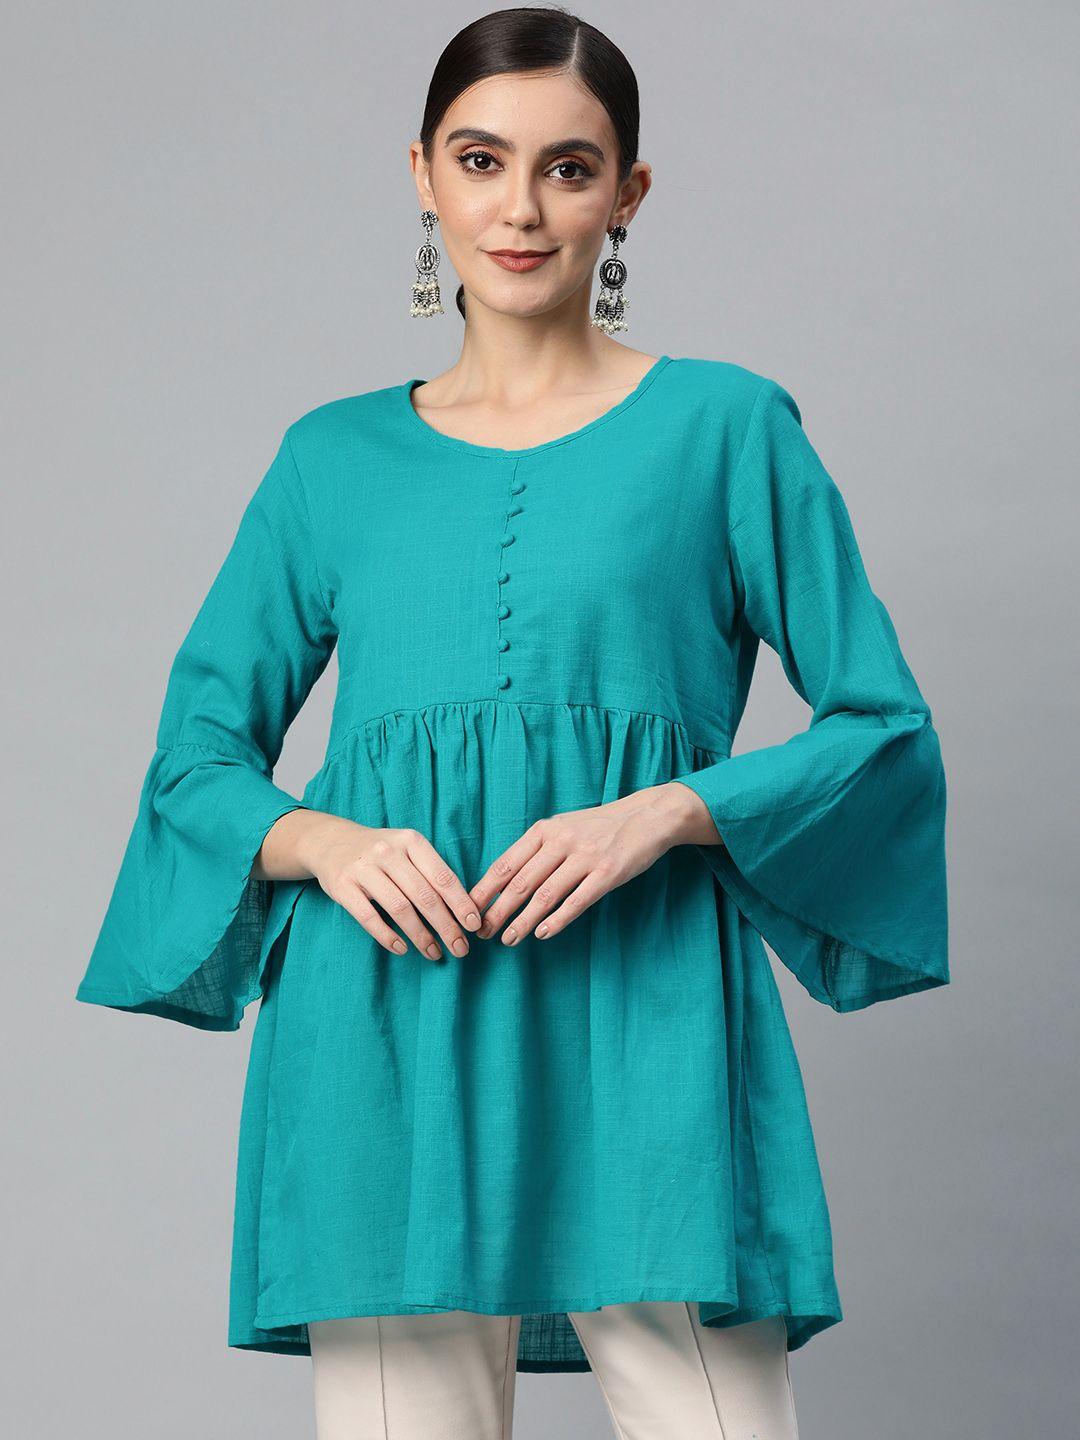 svarchi-teal-green-pure-cotton-solid-a-line-top